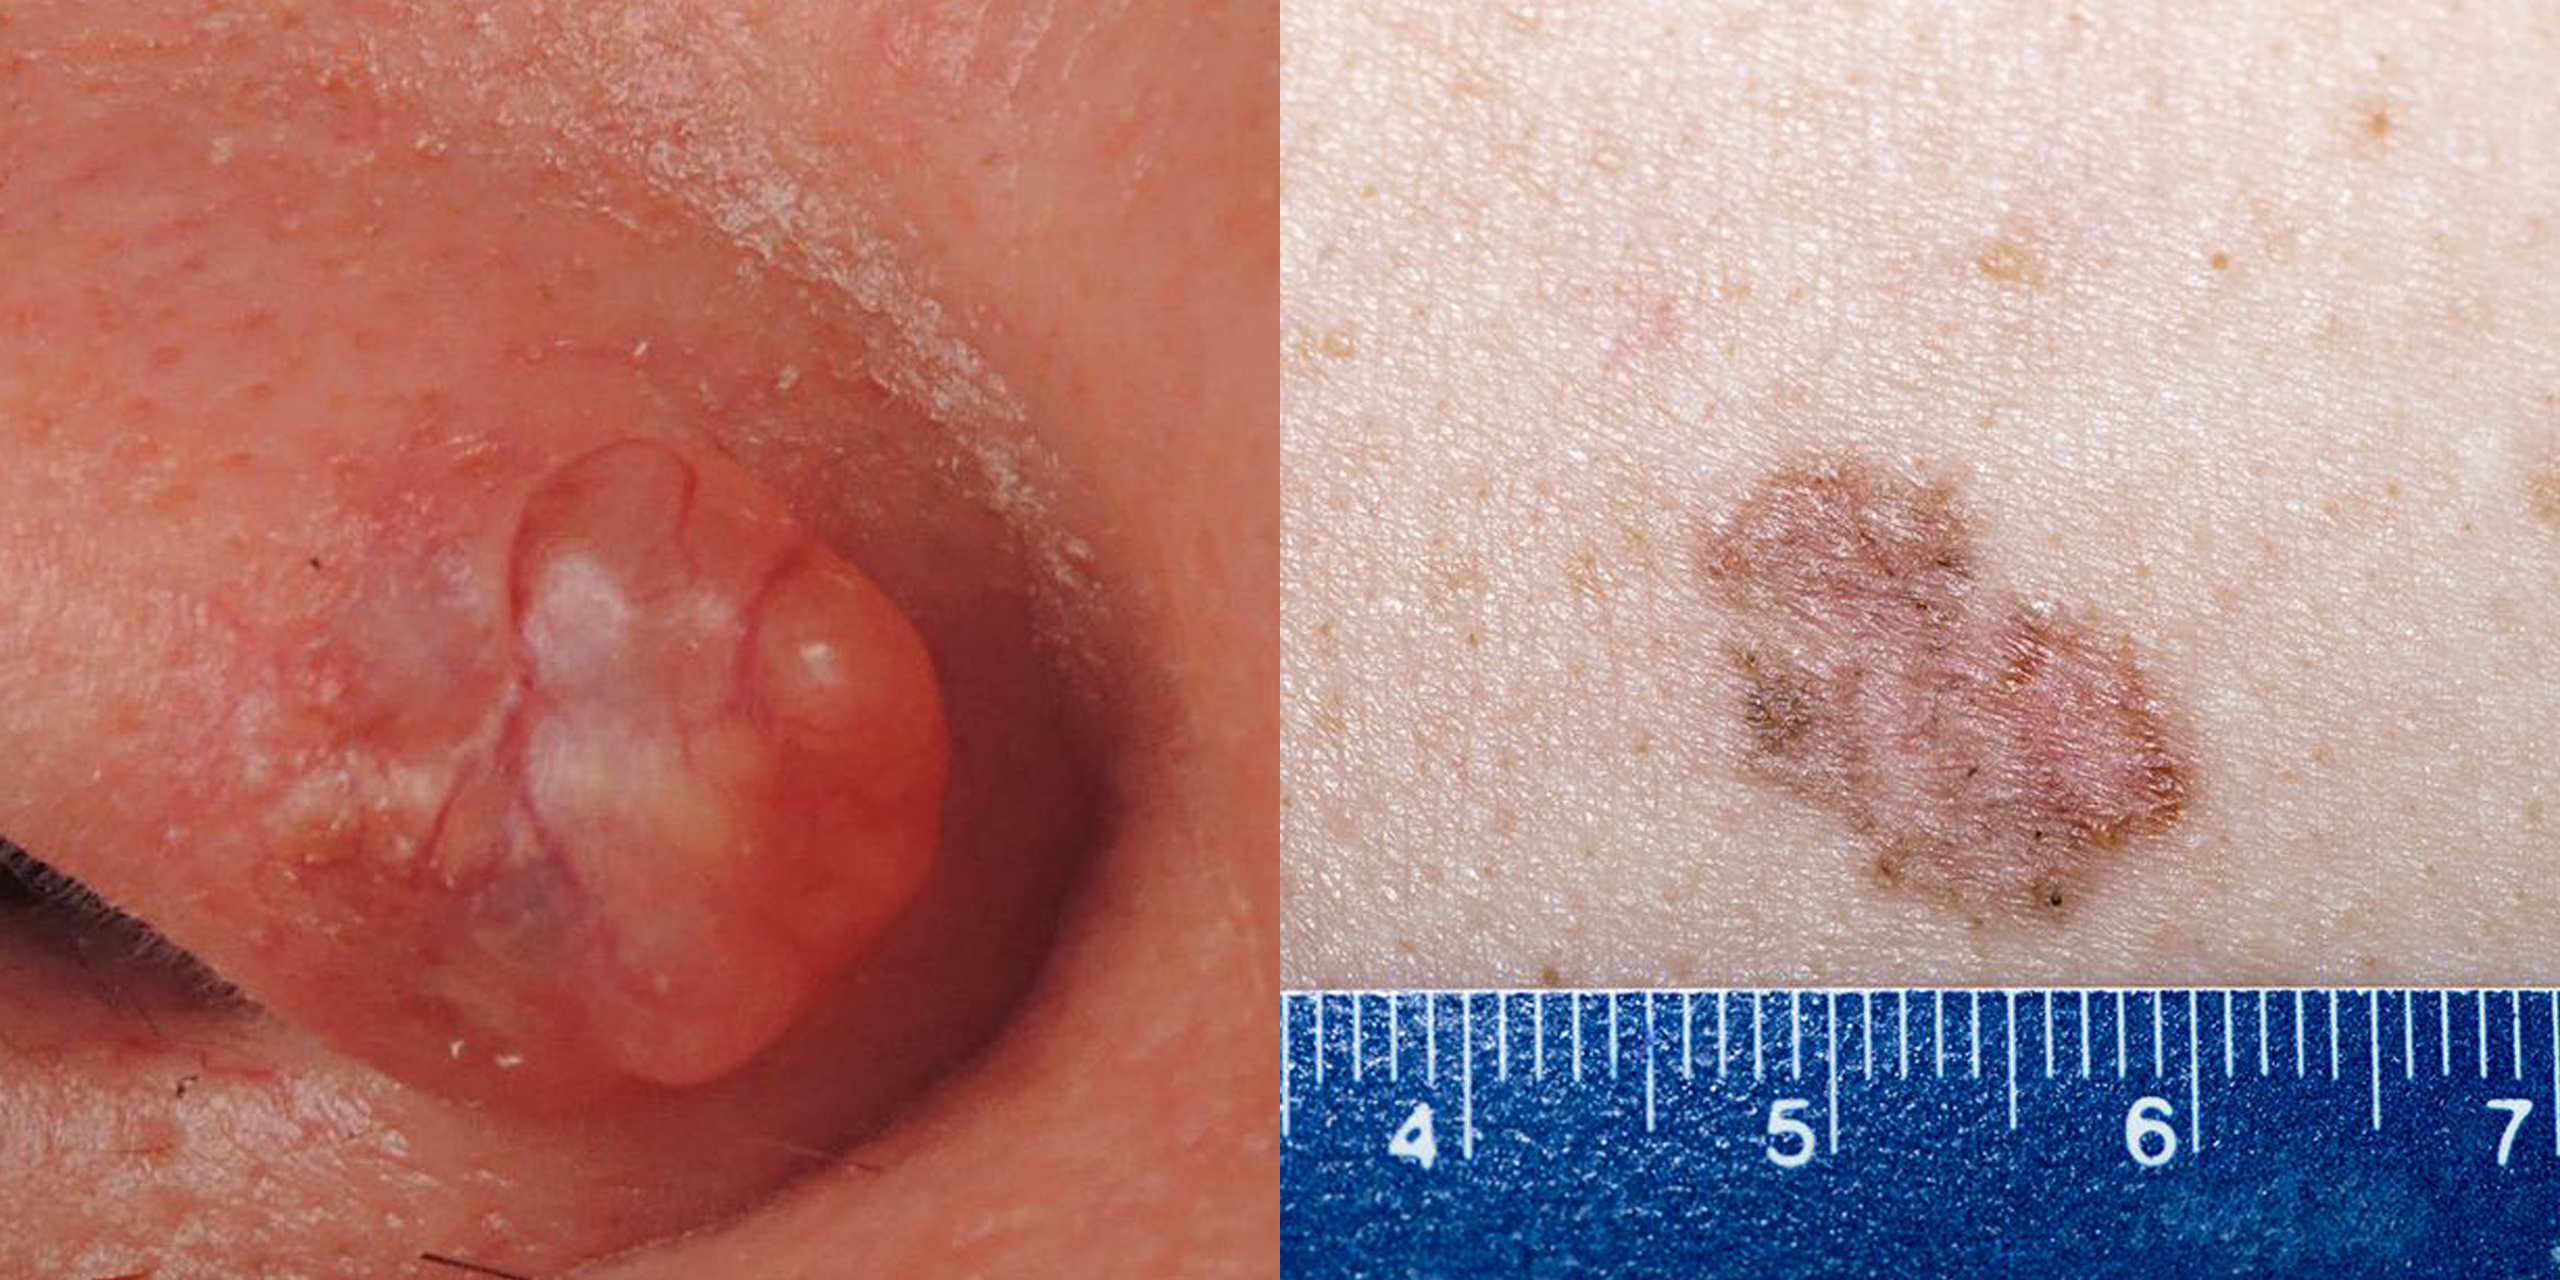 Skin Cancer Moles and how to detect them